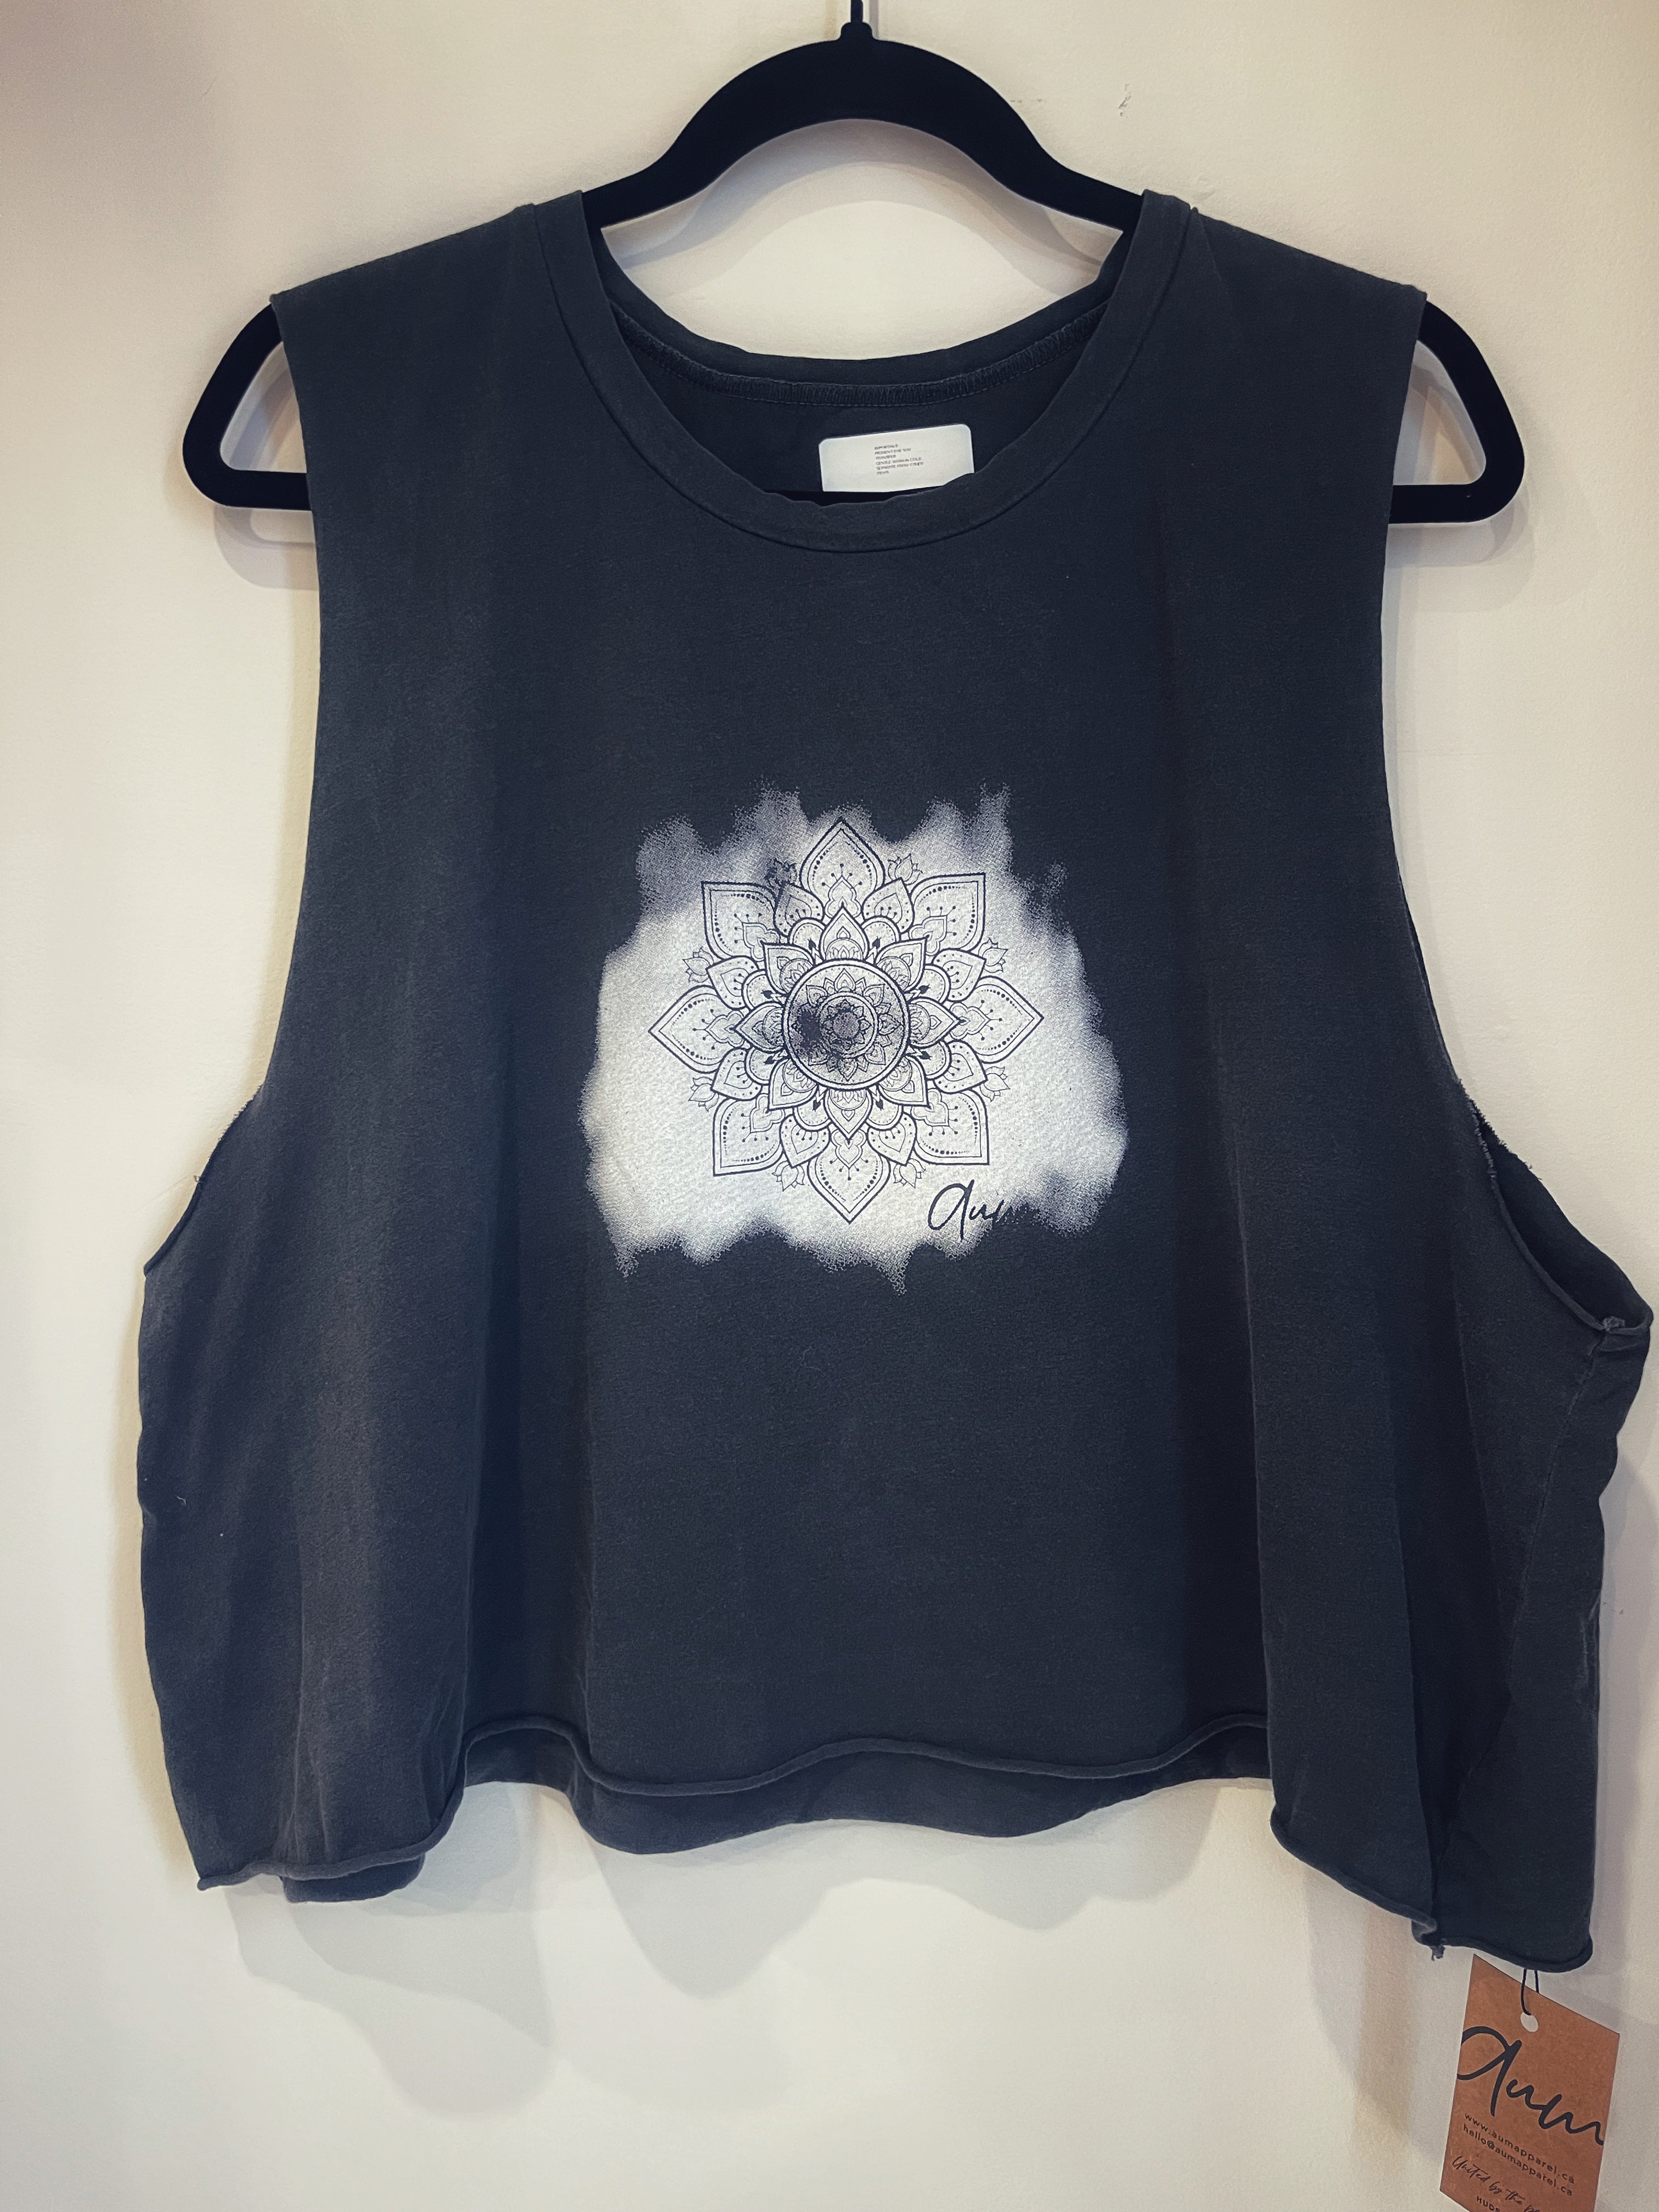 A black tank top with an etched mandala and Aum logo design in white.